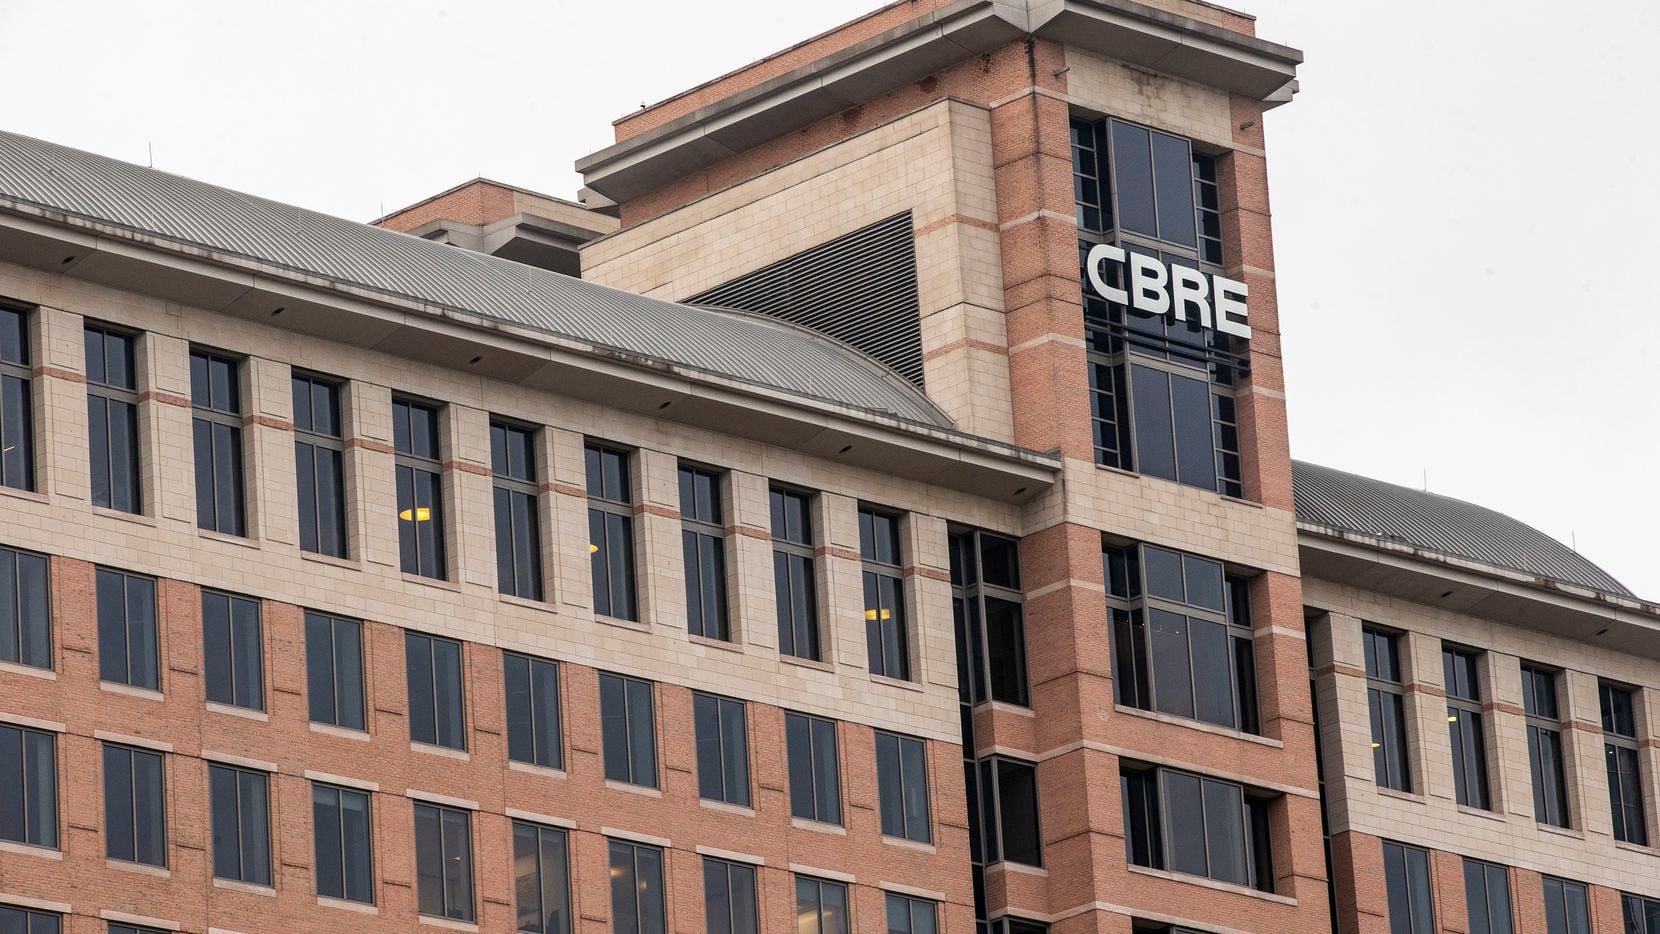 CBRE's profits fell to $81.1 million in the fourth quarter.